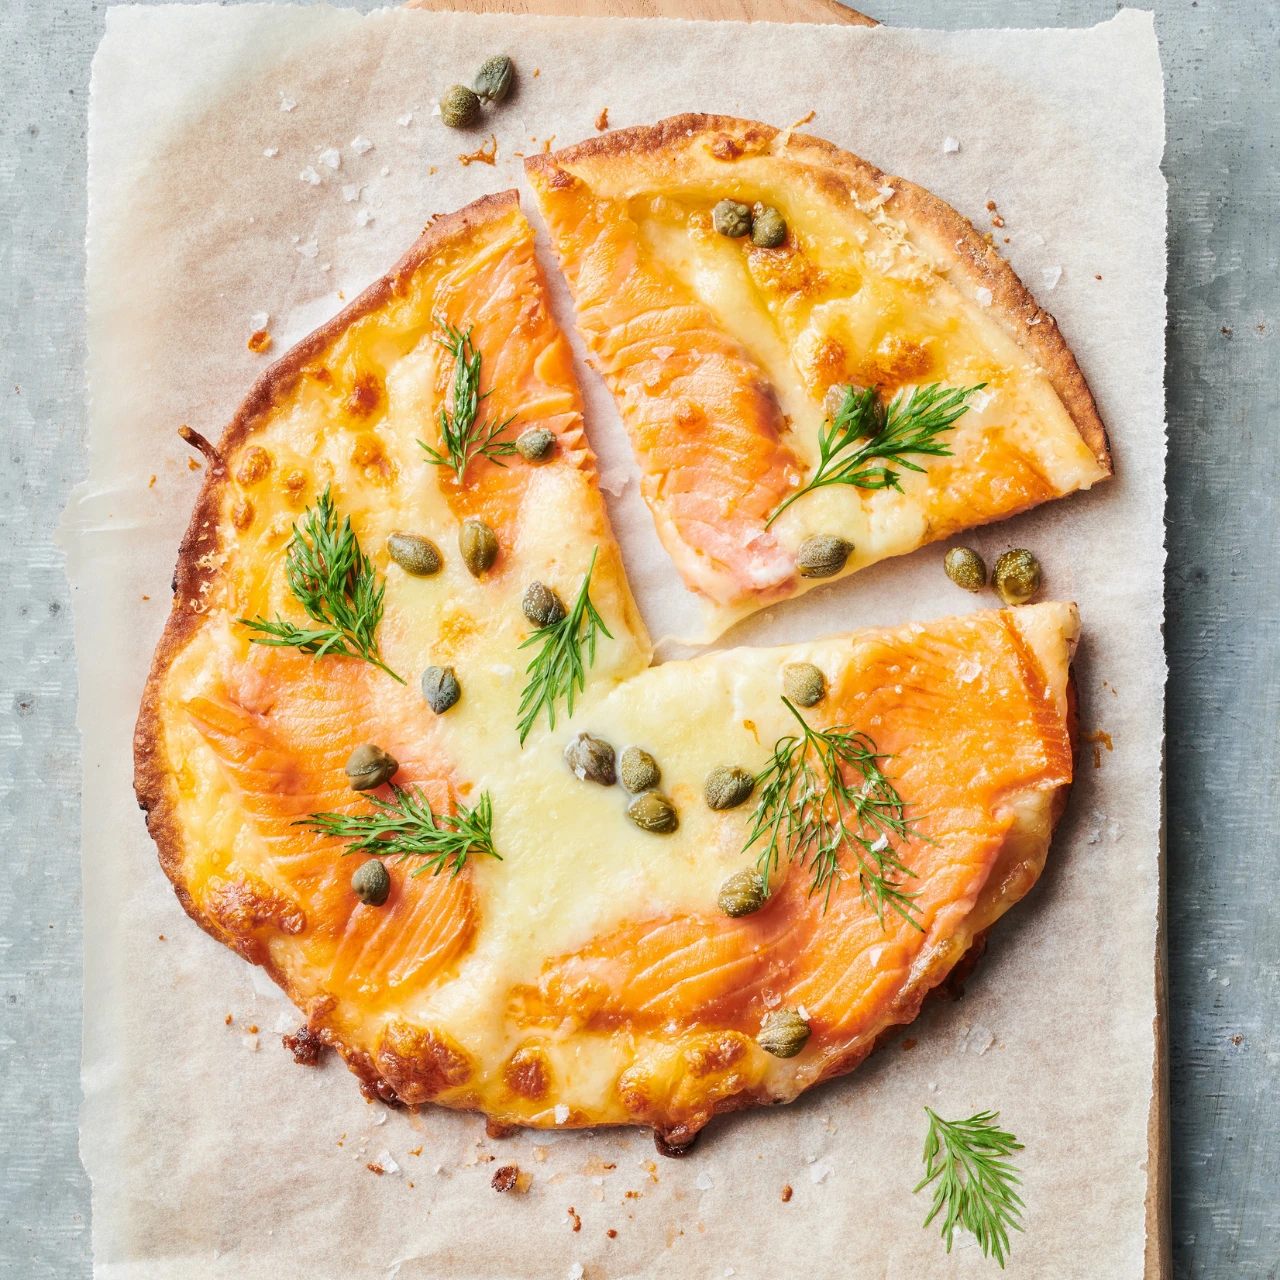 Try our NZ King Smoked Salmon Pizza Bianco Recipe. Made with thin slices of cold smoked salmon, parmesan and mozzarella.